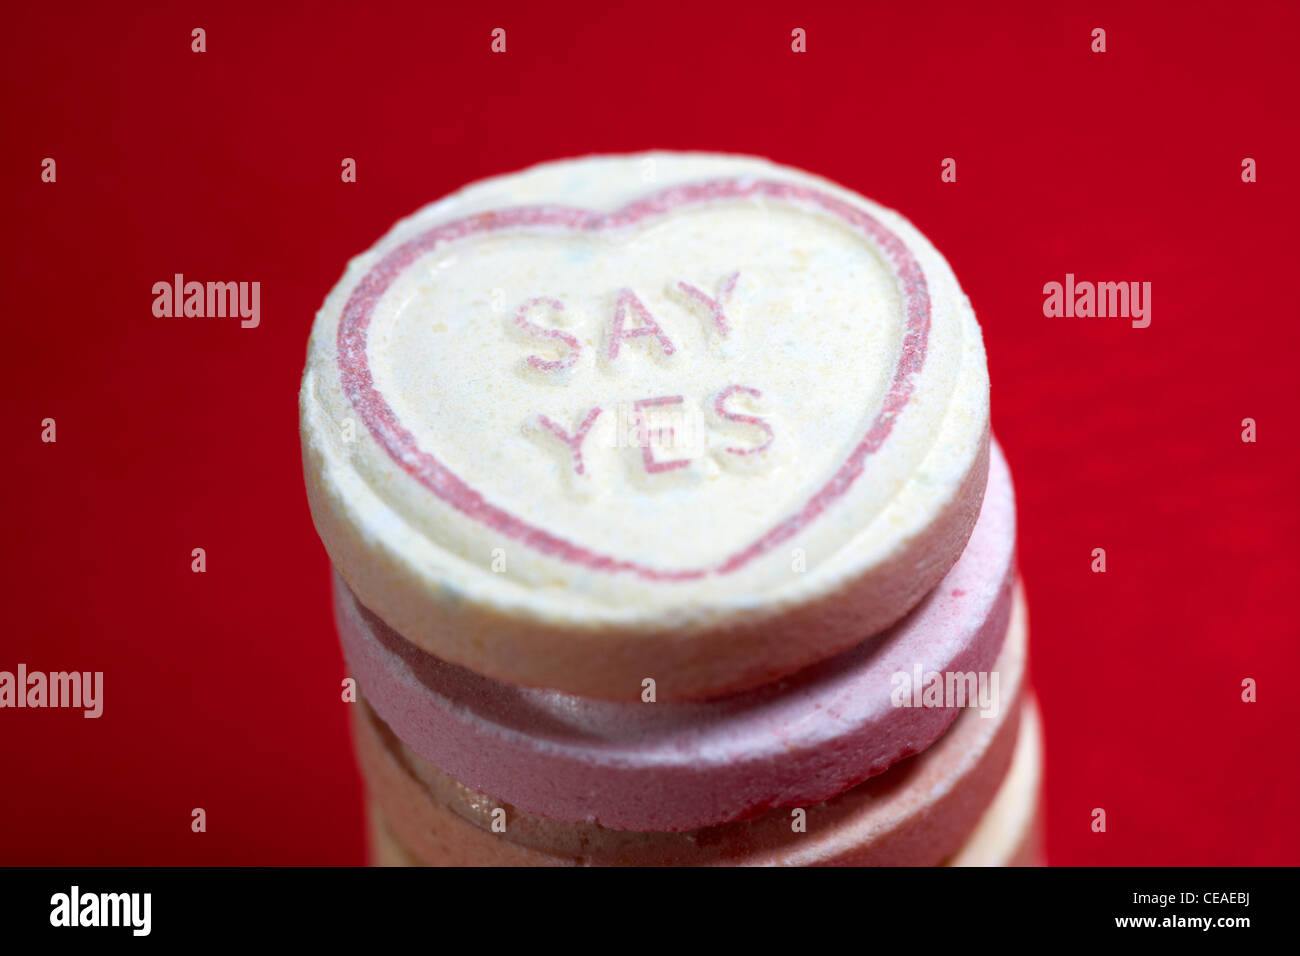 say yes marriage proposal love heart sweet on red background Stock Photo